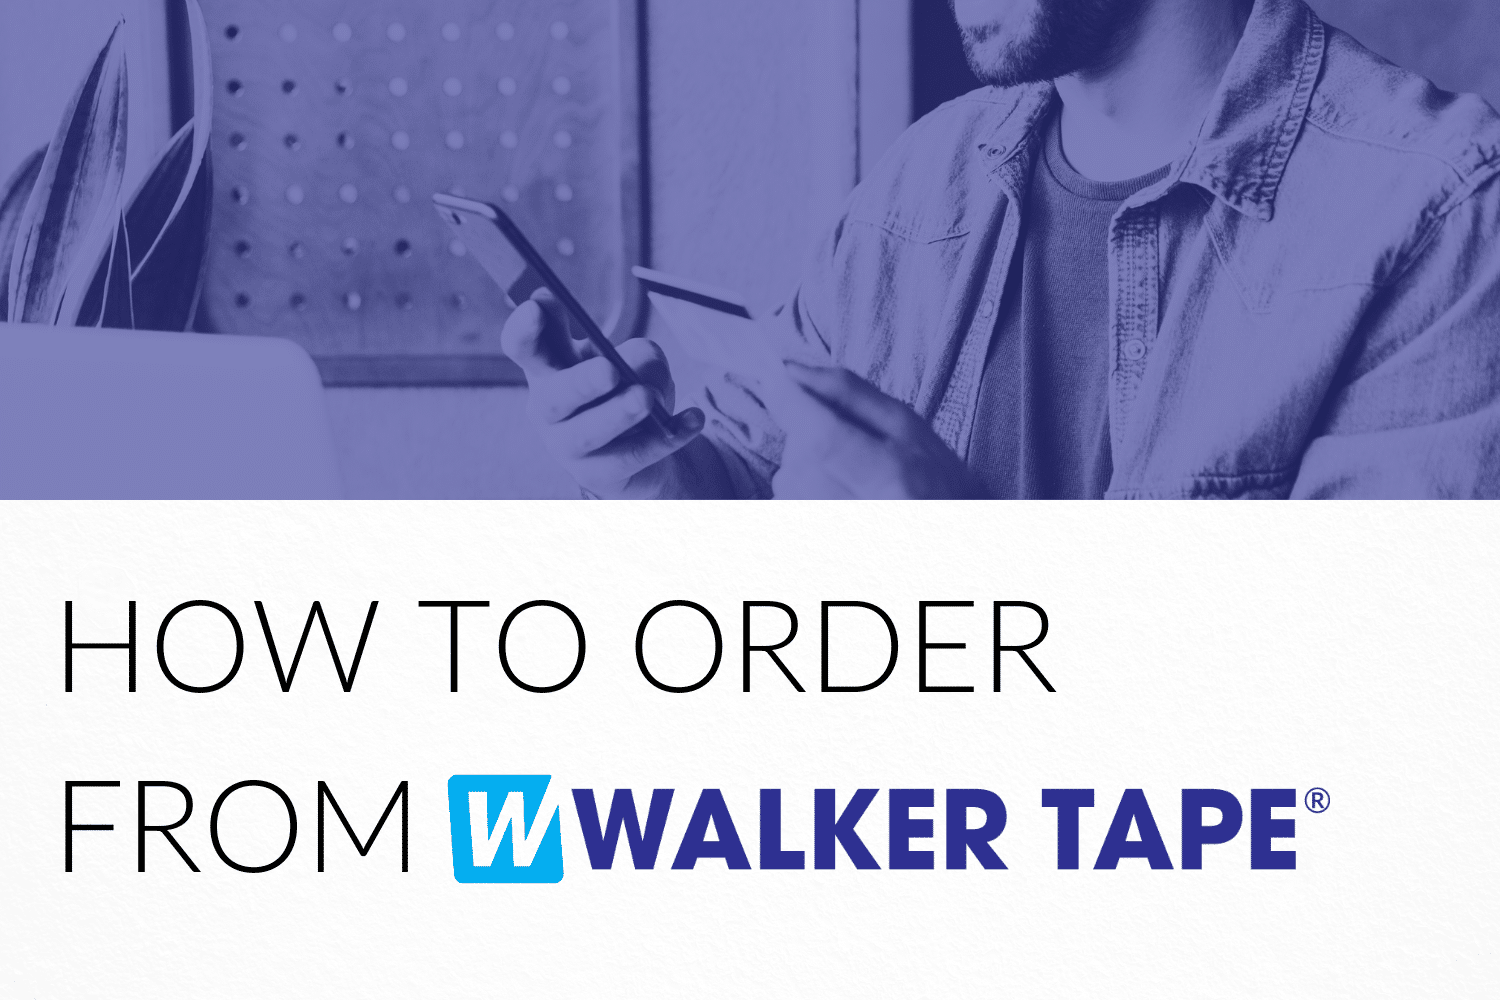 How To Order from Walker Tape® - Graphic